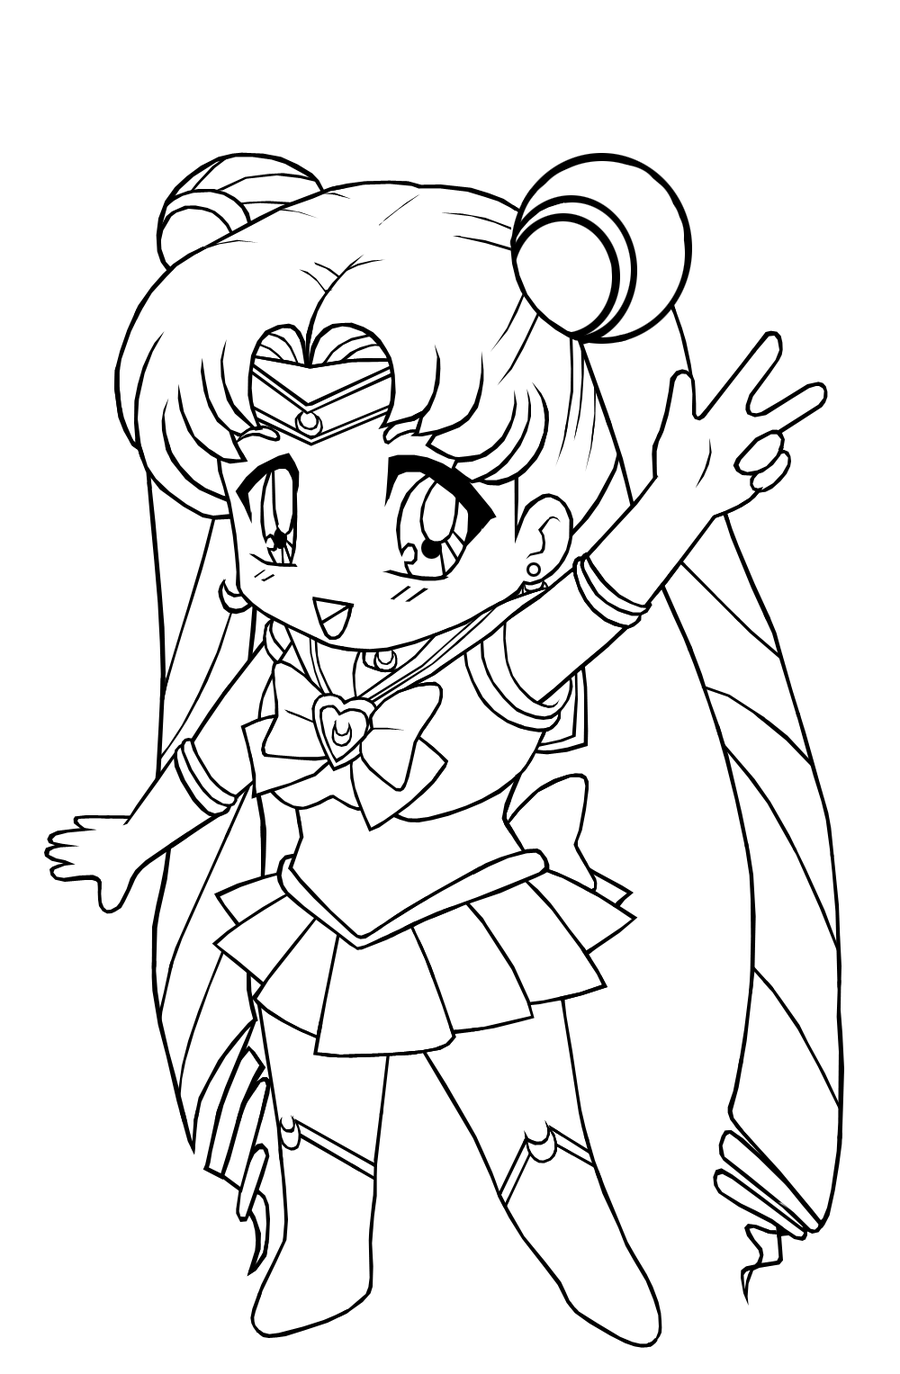 anime coloring page anime coloring pages google search coloring moon page coloring anime 